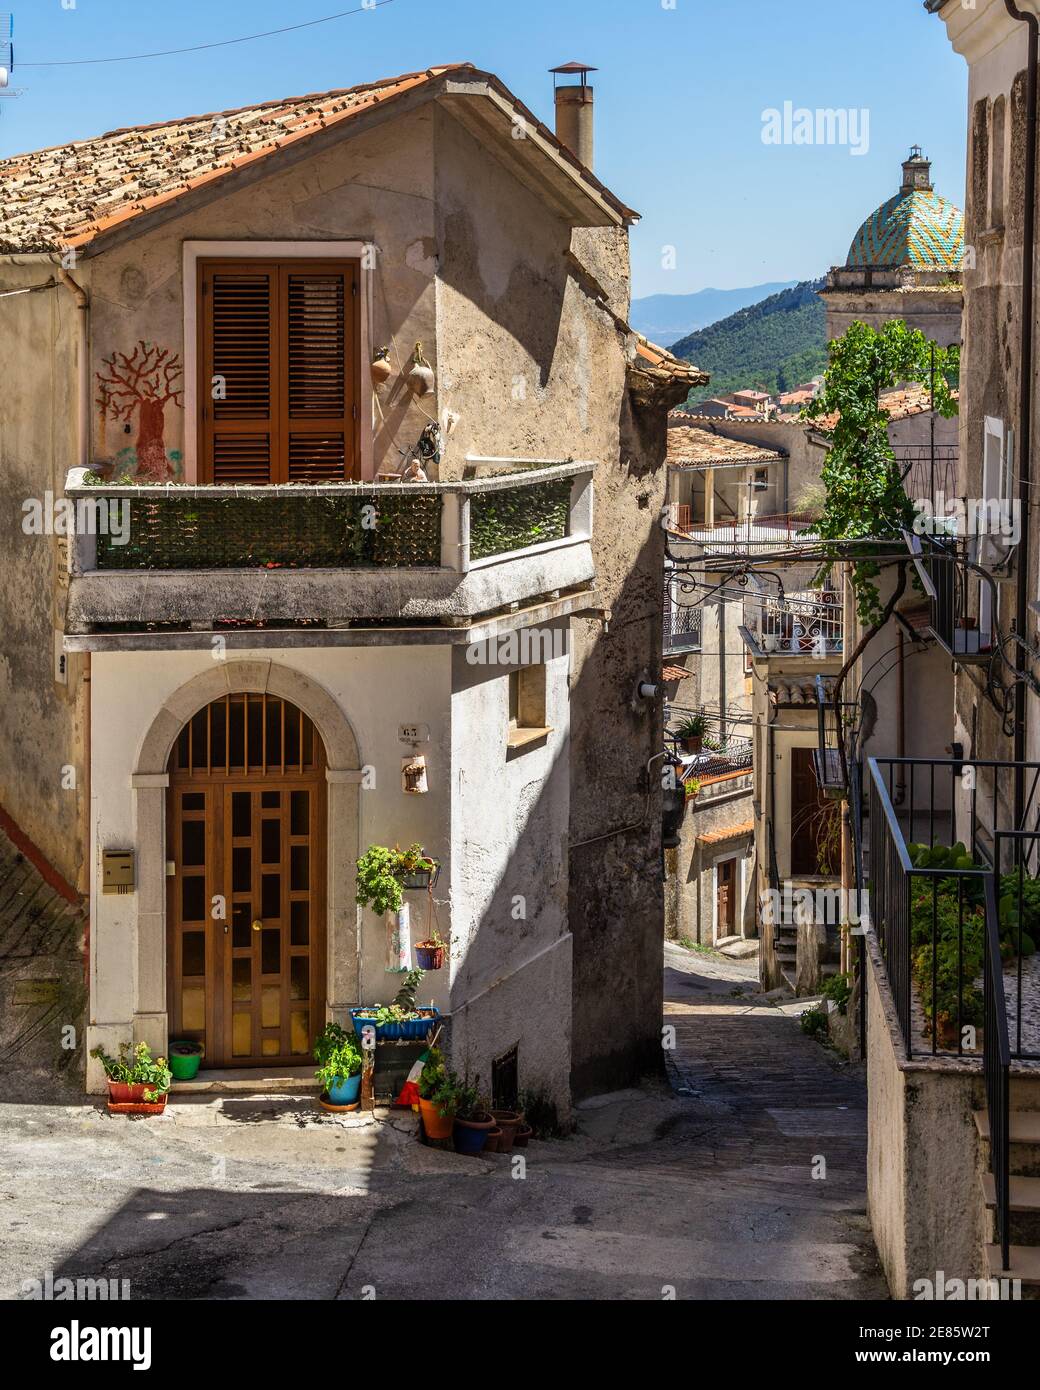 Typical narrow street in Morano Calabro, one of the best-preserved medieval villages of Calabria region, Italy Stock Photo